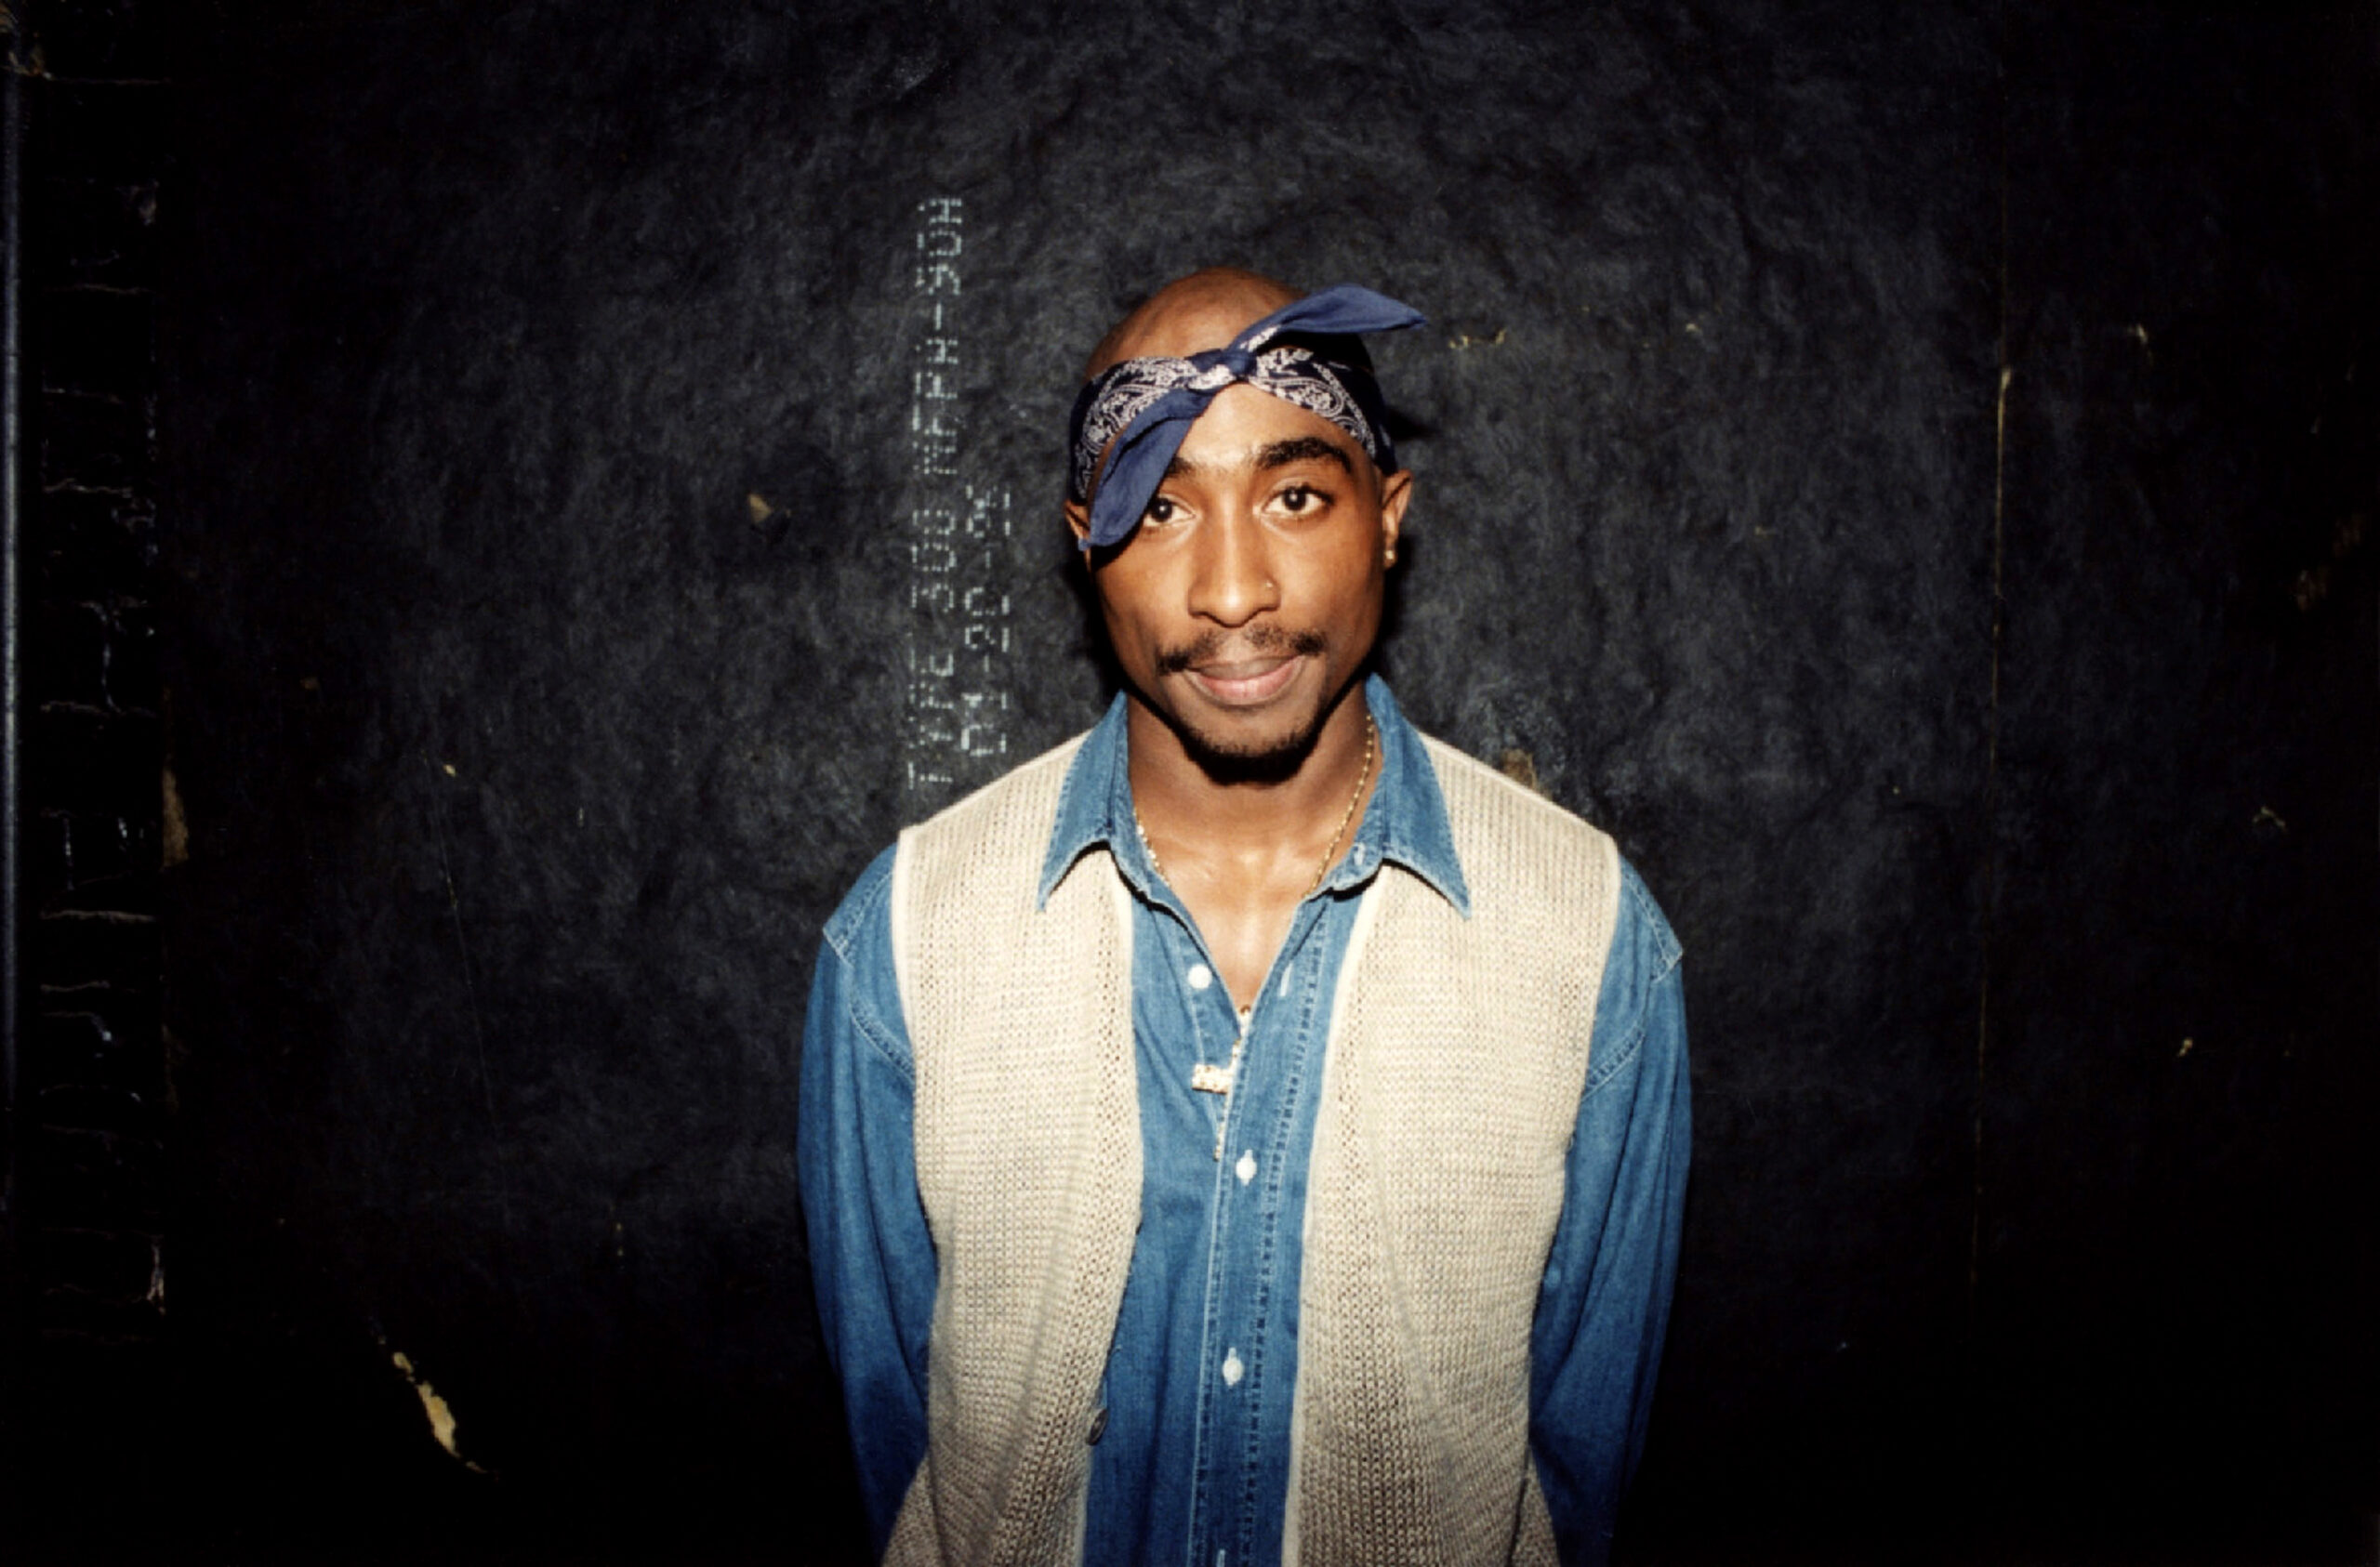 Man arrested in relation to Tupac Shakur’s death, say Las Vegas police.